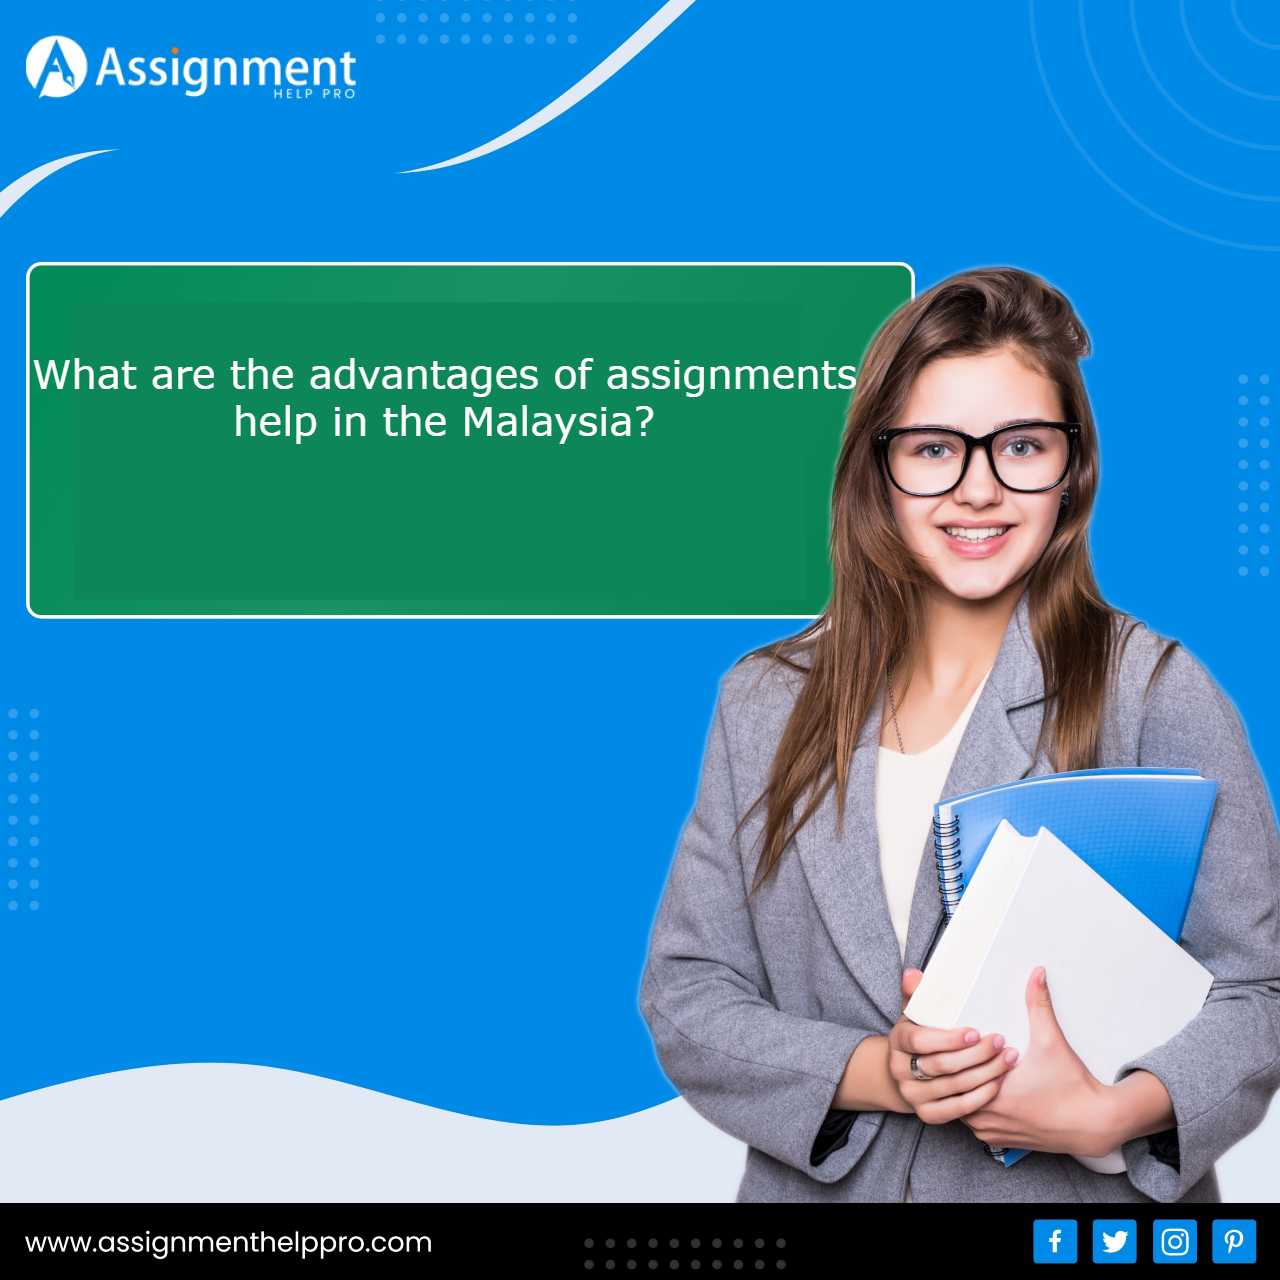 What are the advantages of assignments help in the Malaysia?